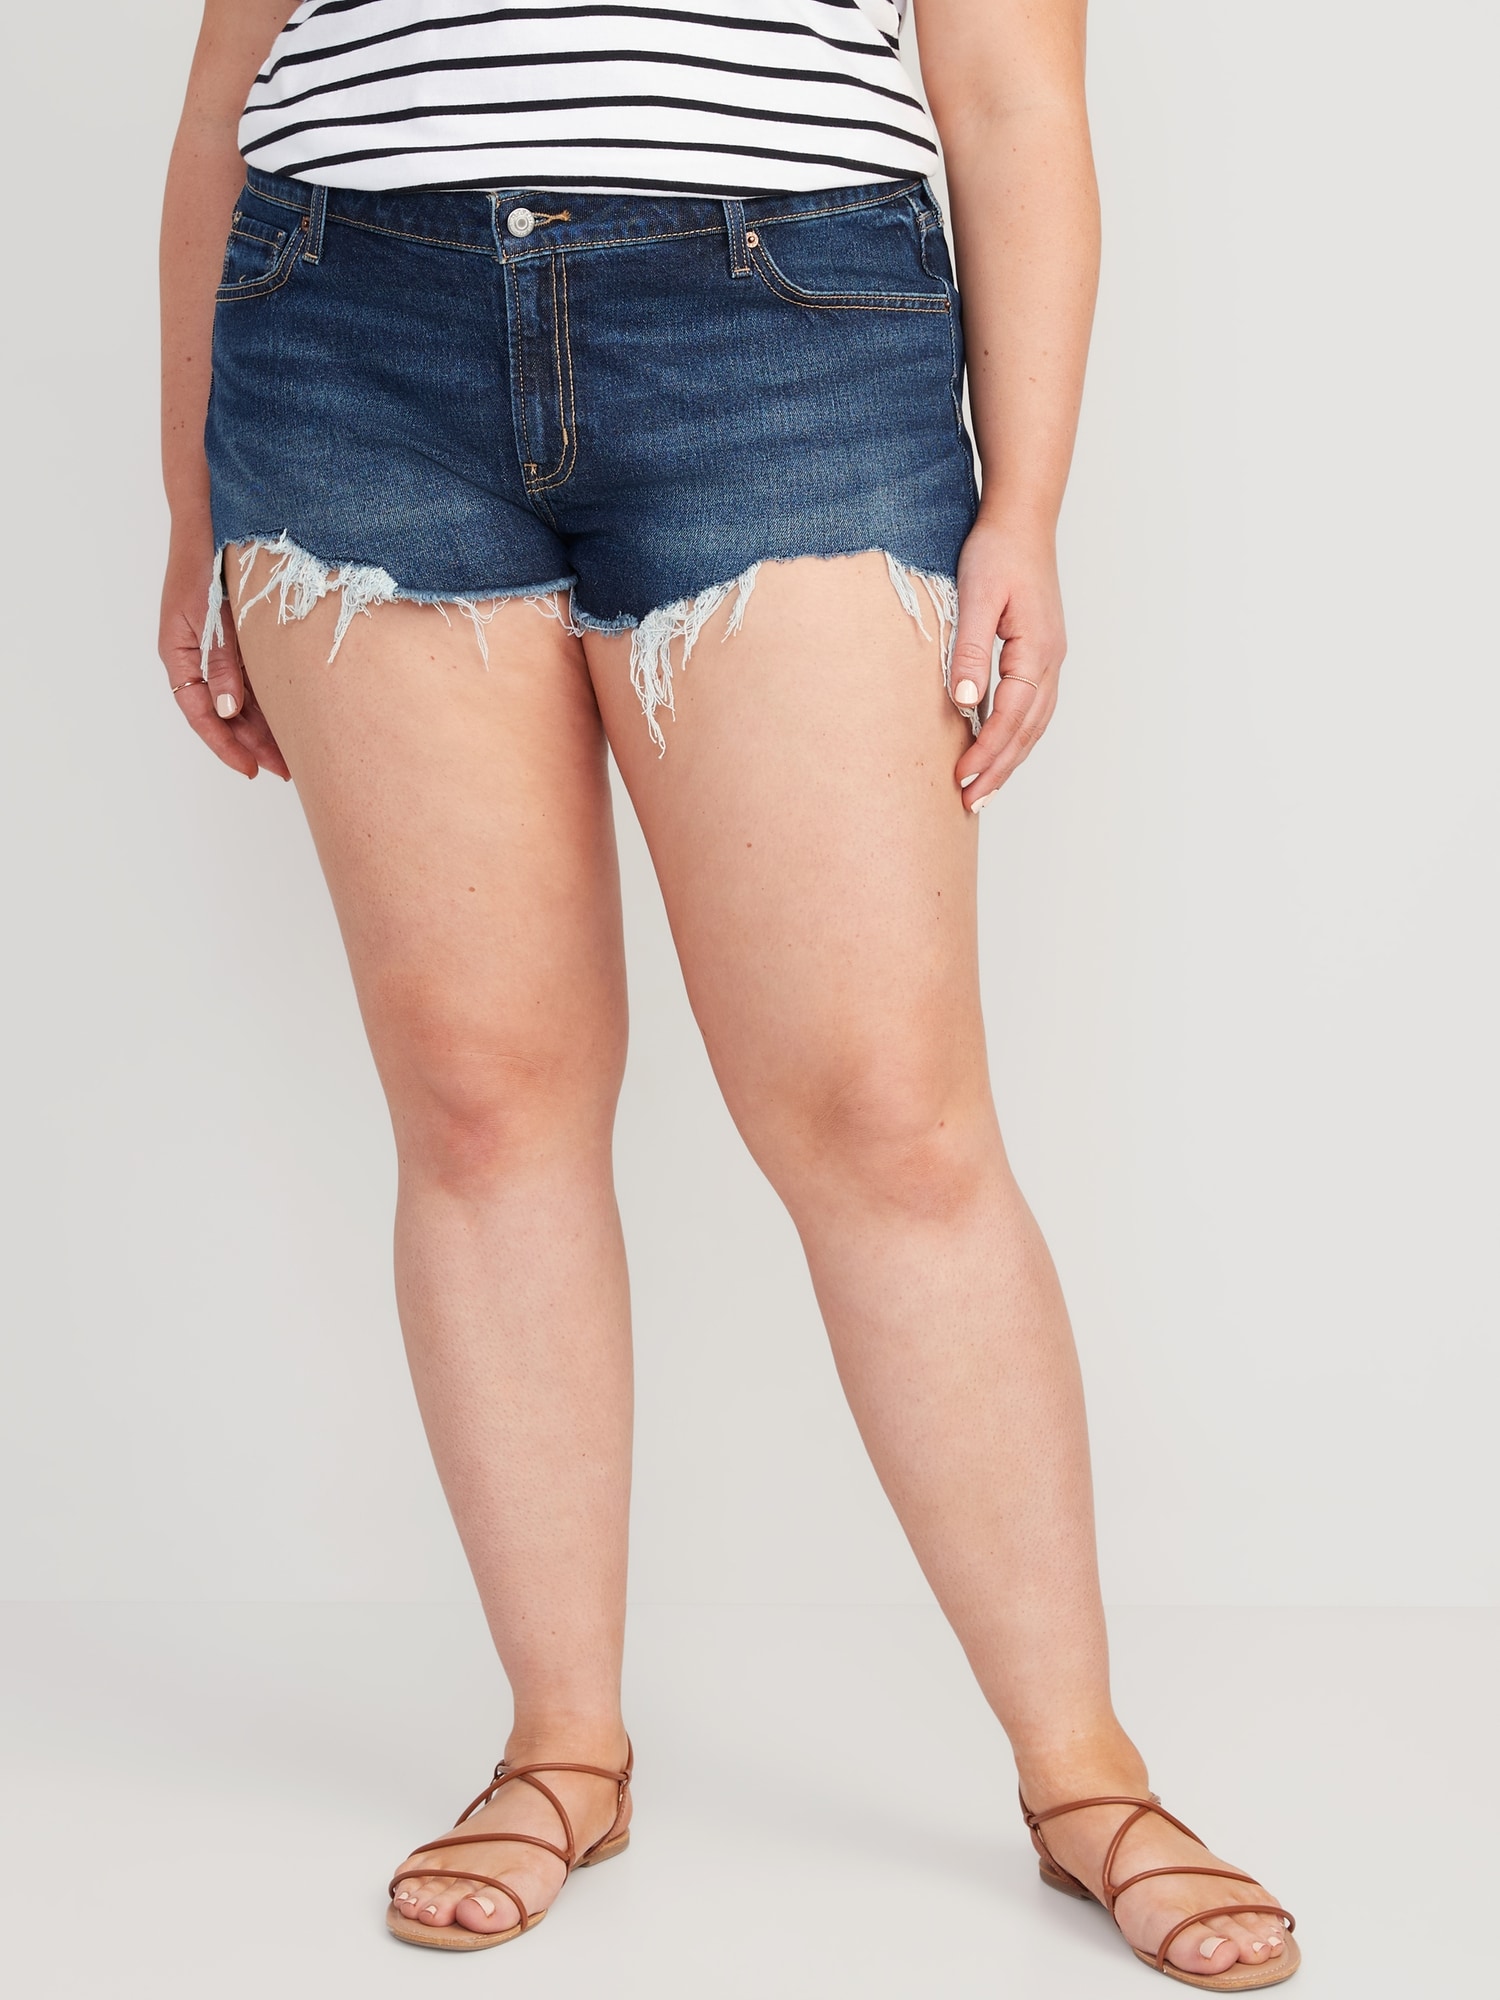 Low-Rise OG Straight Super-Short Cut-Off Jean Shorts -- 1.5-inch inseam